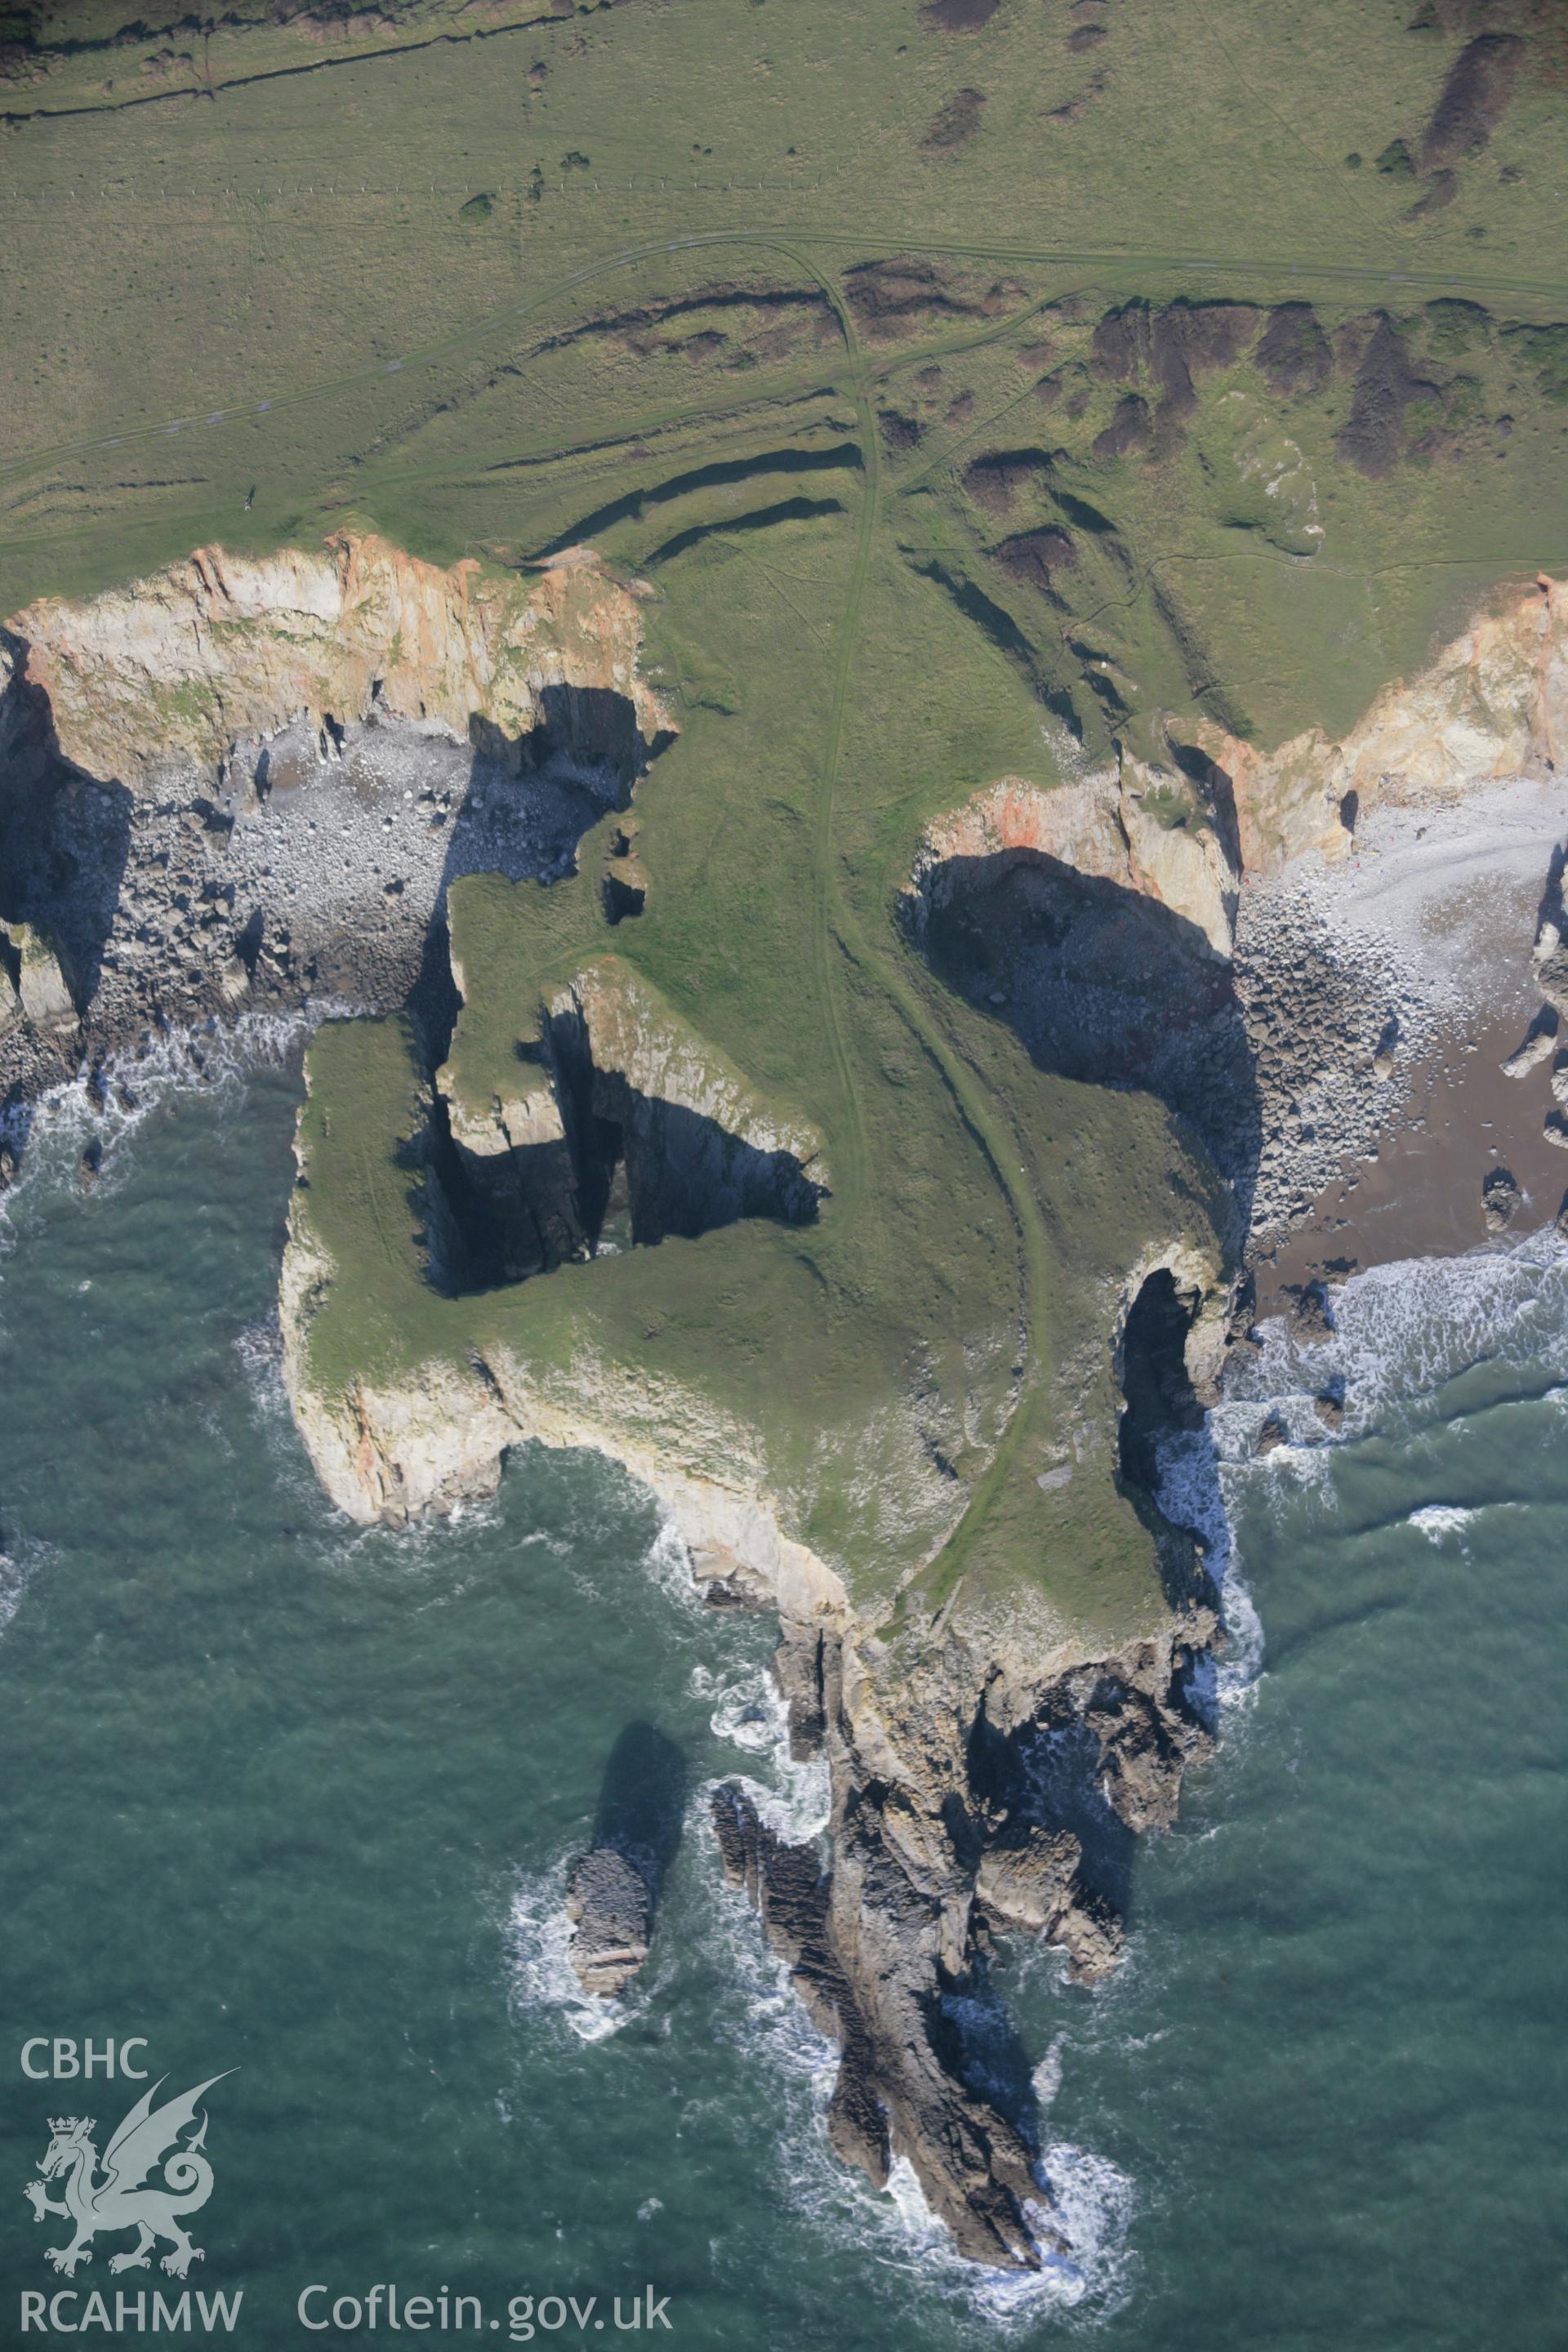 RCAHMW colour oblique aerial photograph of Flimston Bay Camp, Castlemartin from the south. Taken on 19 November 2005 by Toby Driver